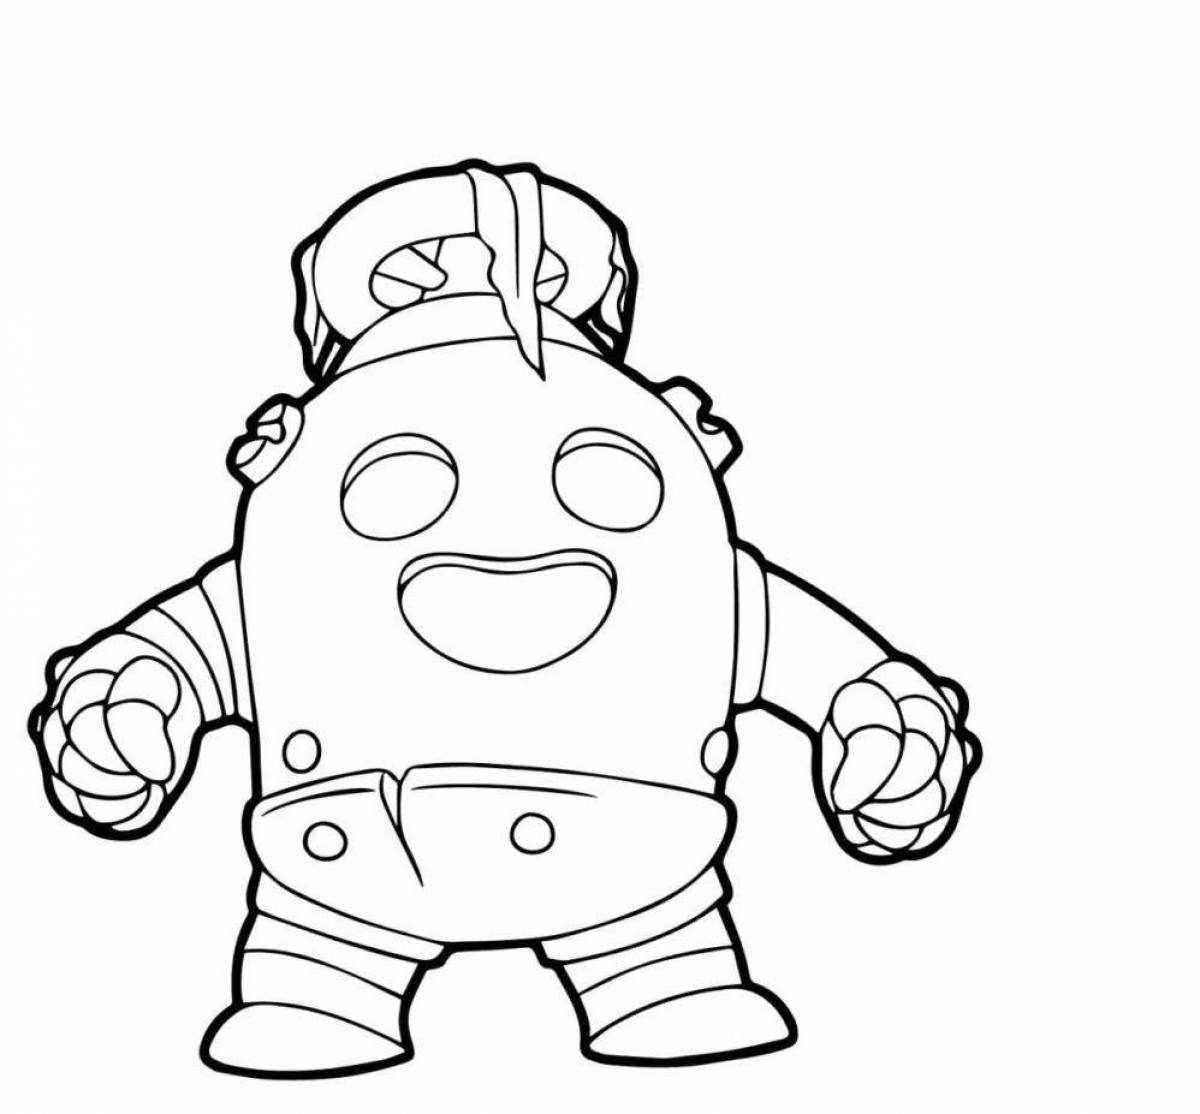 Attractive brawl stars pins coloring pages